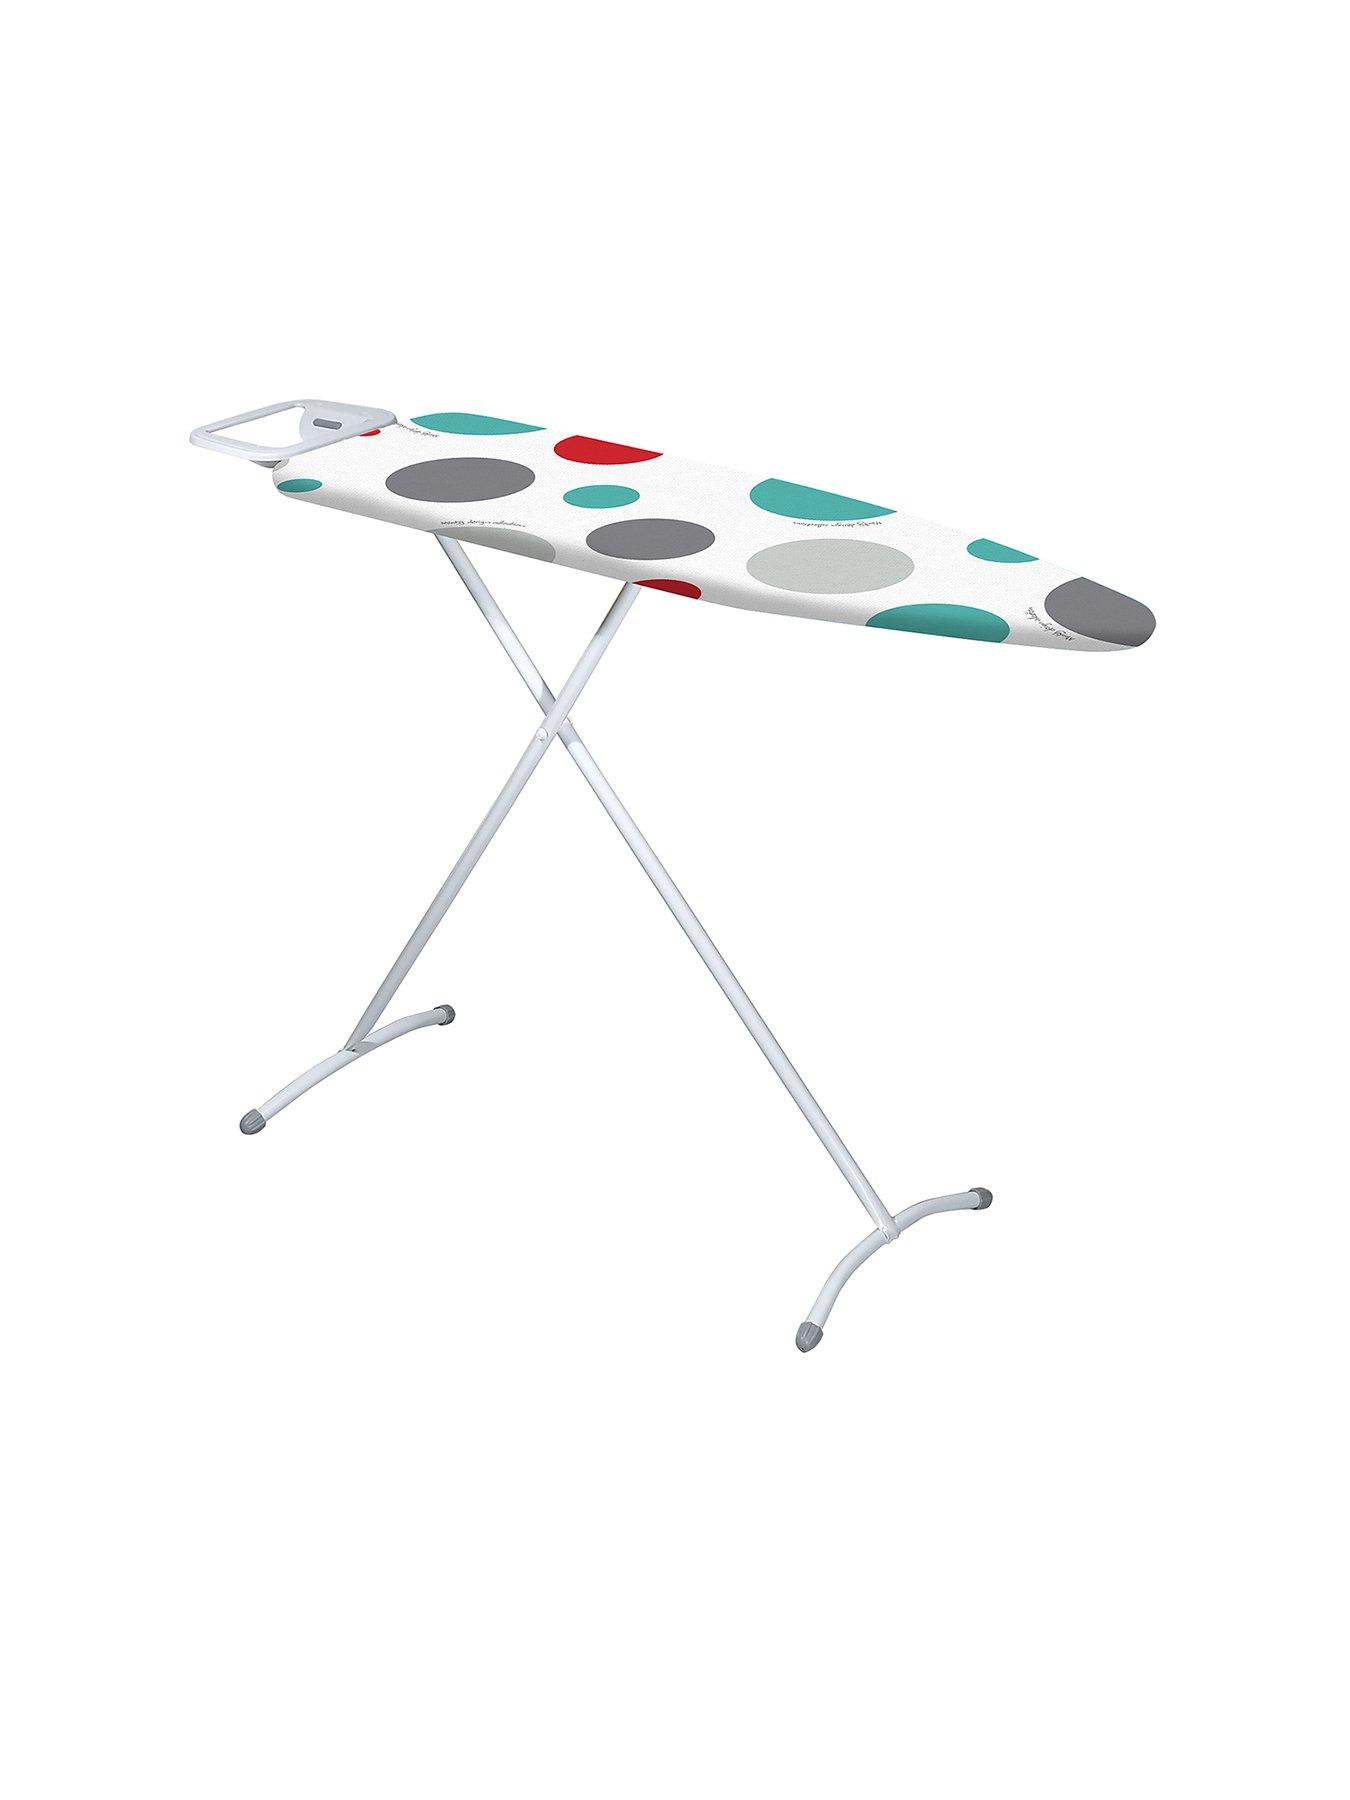 Details about   Space Saving Non-Skid Folding Tabletop Ironing Board 